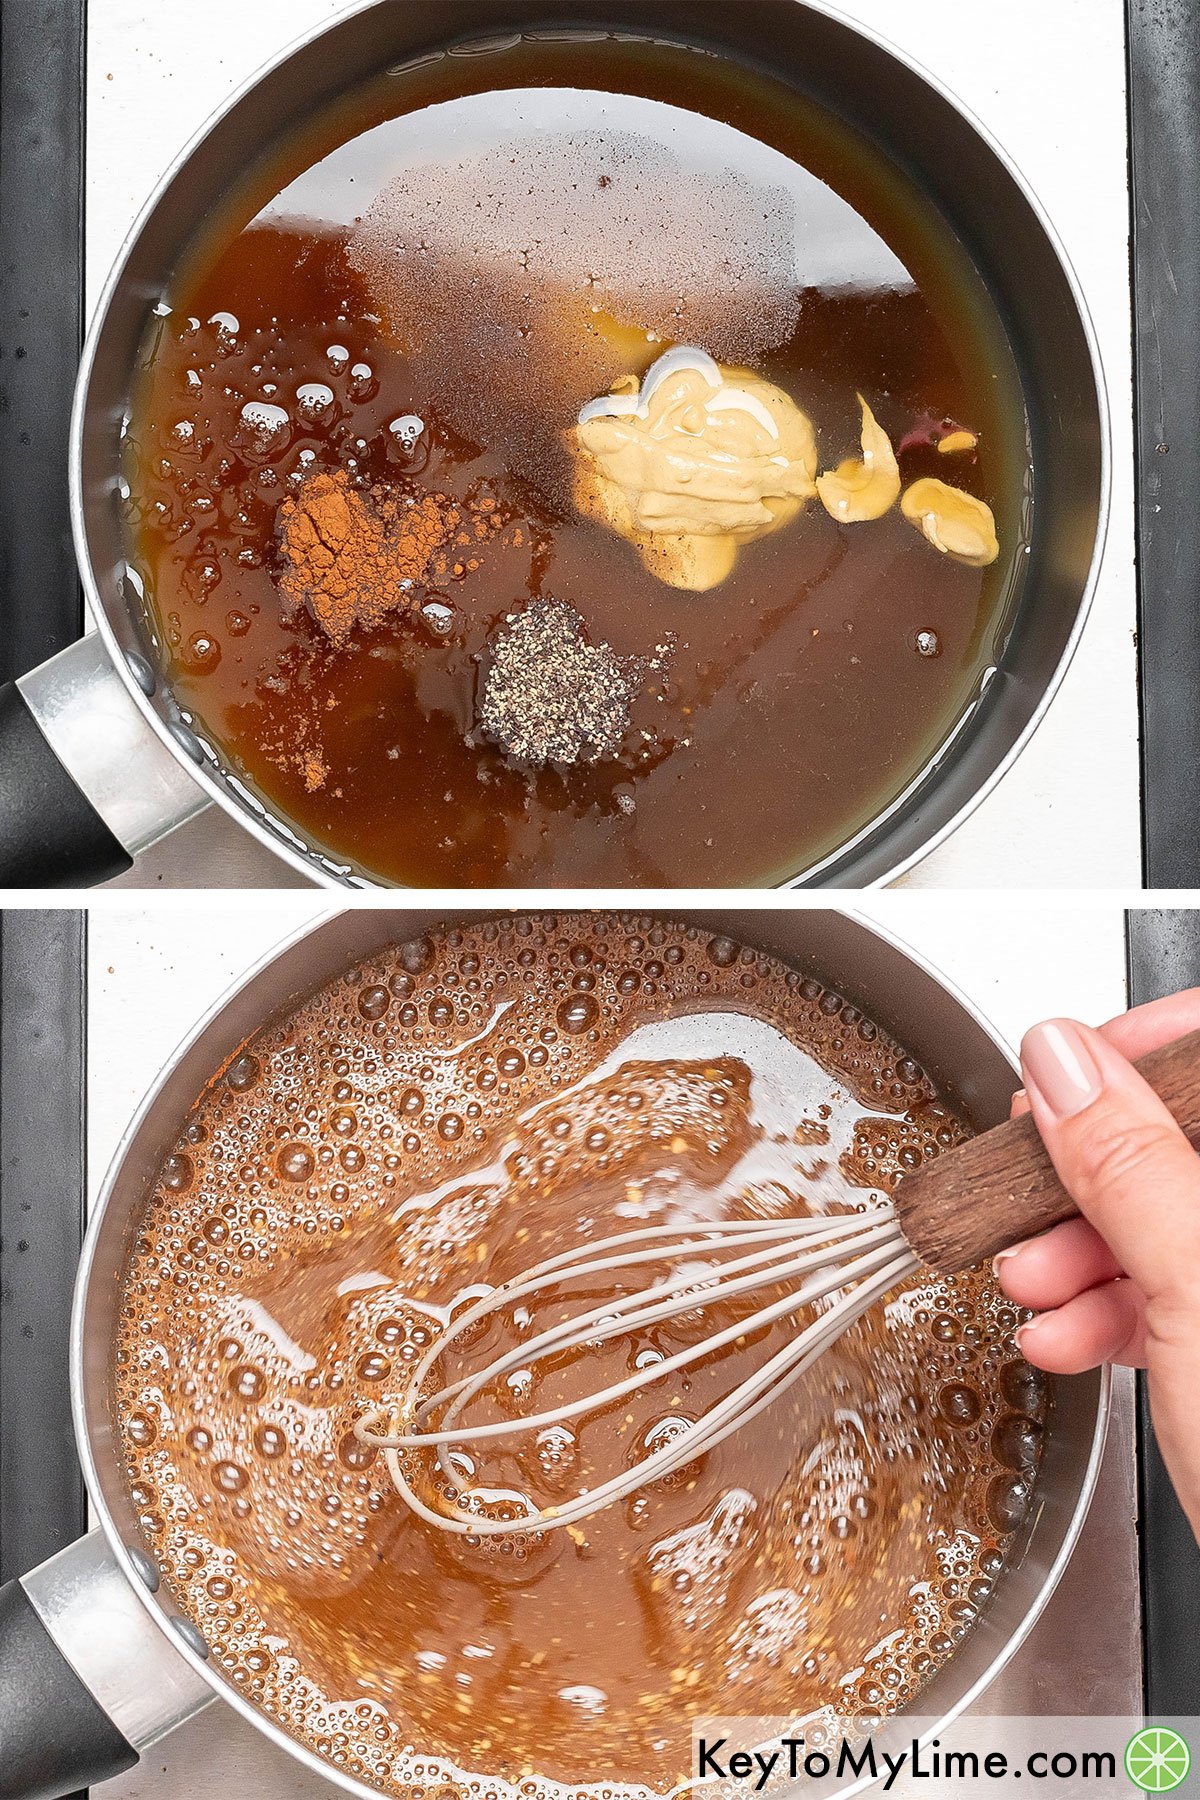 Adding pineapple juice, brown sugar, honey, Dijon mustard, apple cider vinegar, cinnamon, cloves, and black pepper to a sauce pan, and then whisking in the slurry mixture once boiling.